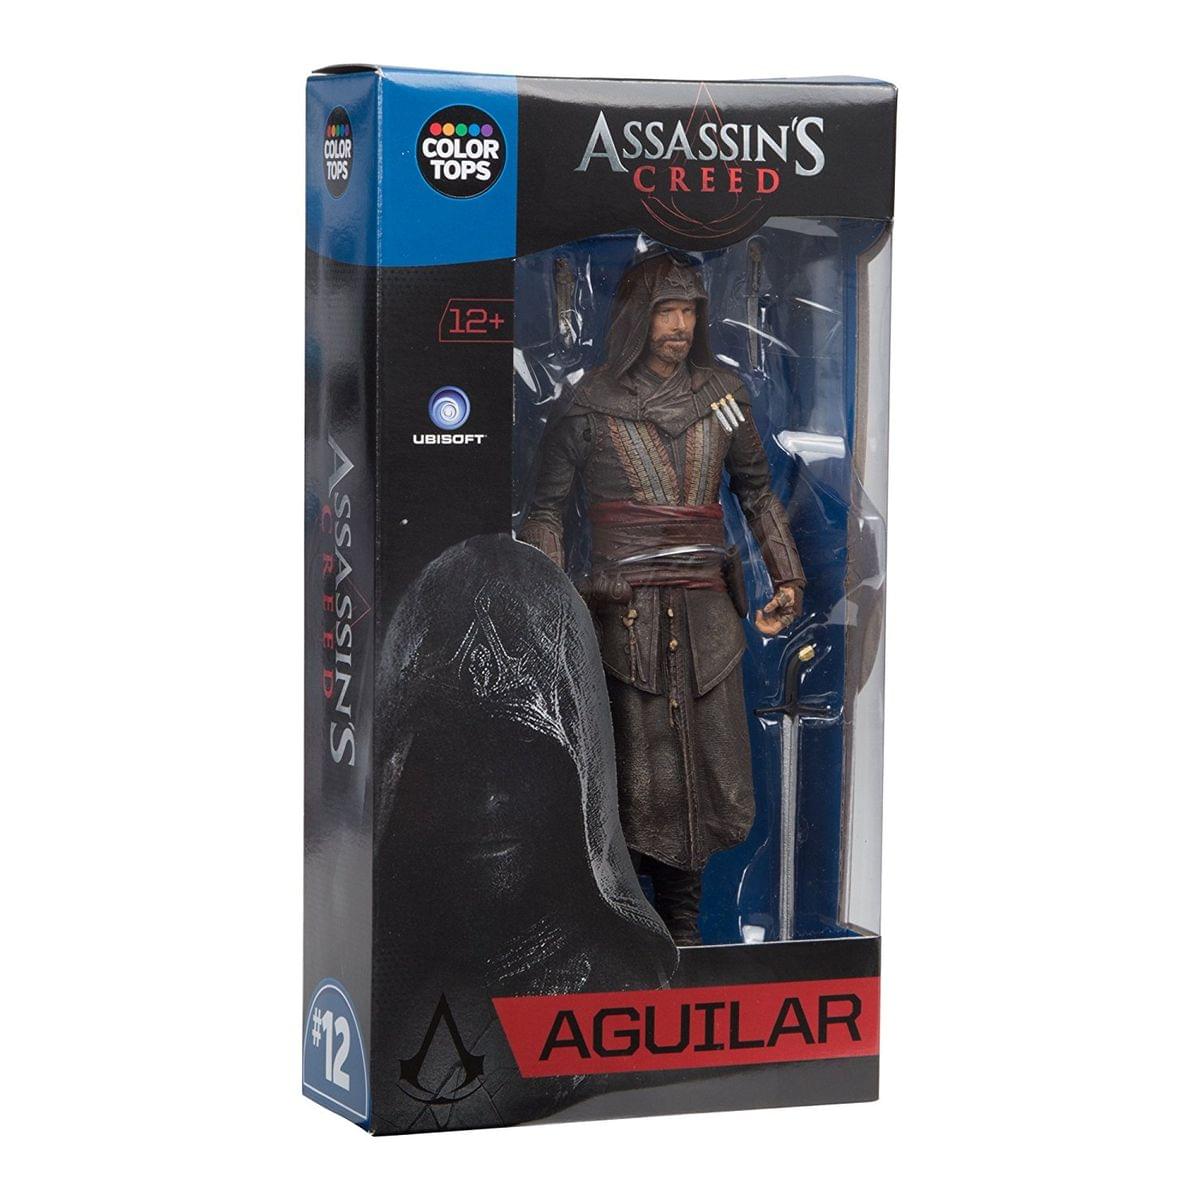 Assassin's Creed Movie 7" Color Tops Action Figure: Aguilar